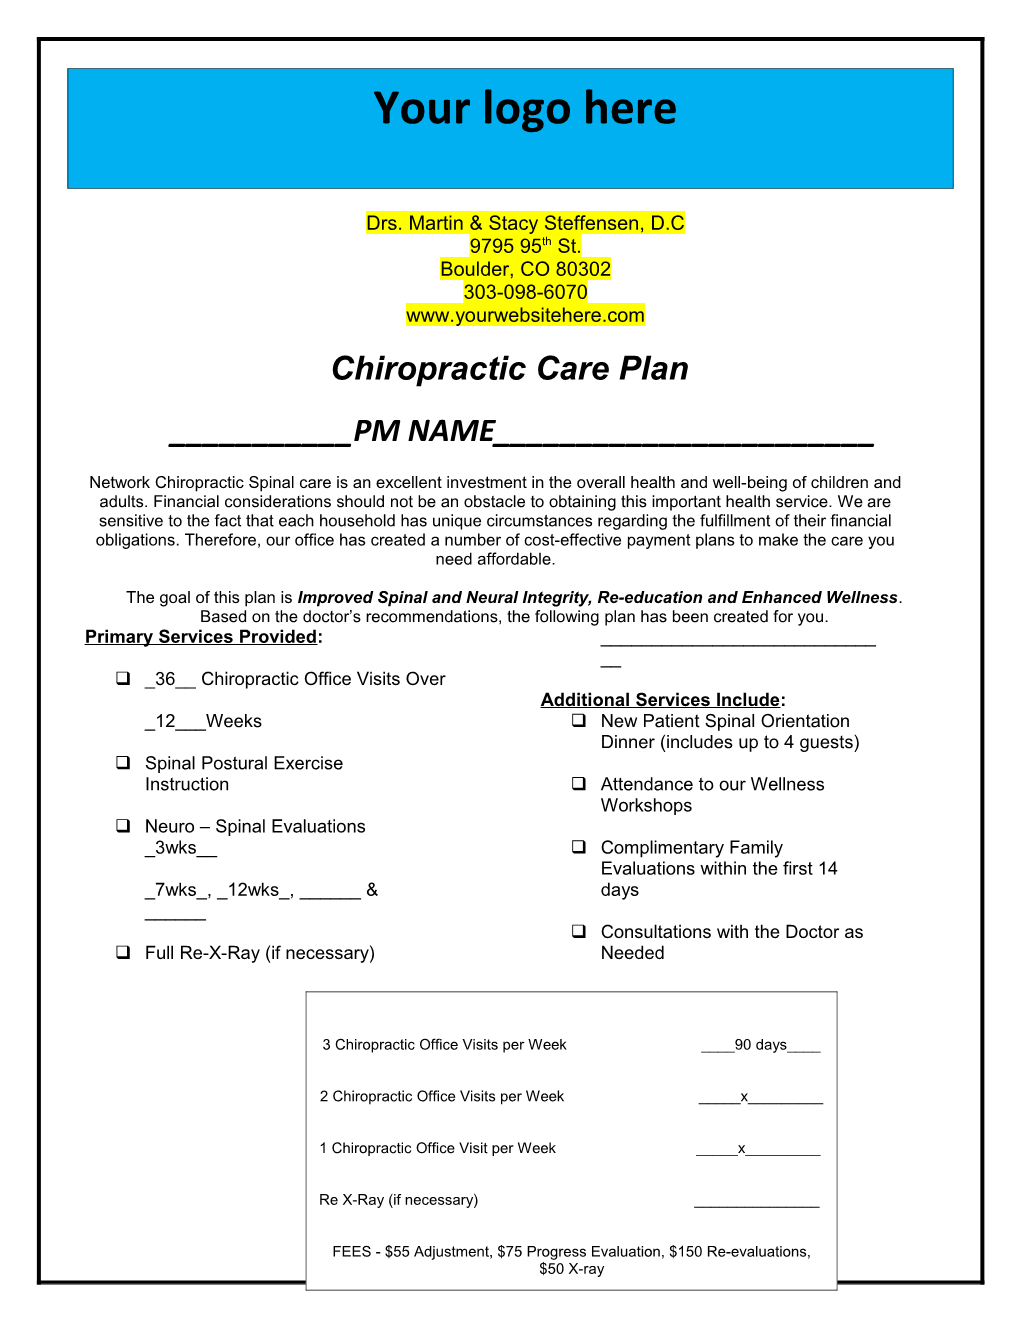 Chiropractic Care Plan